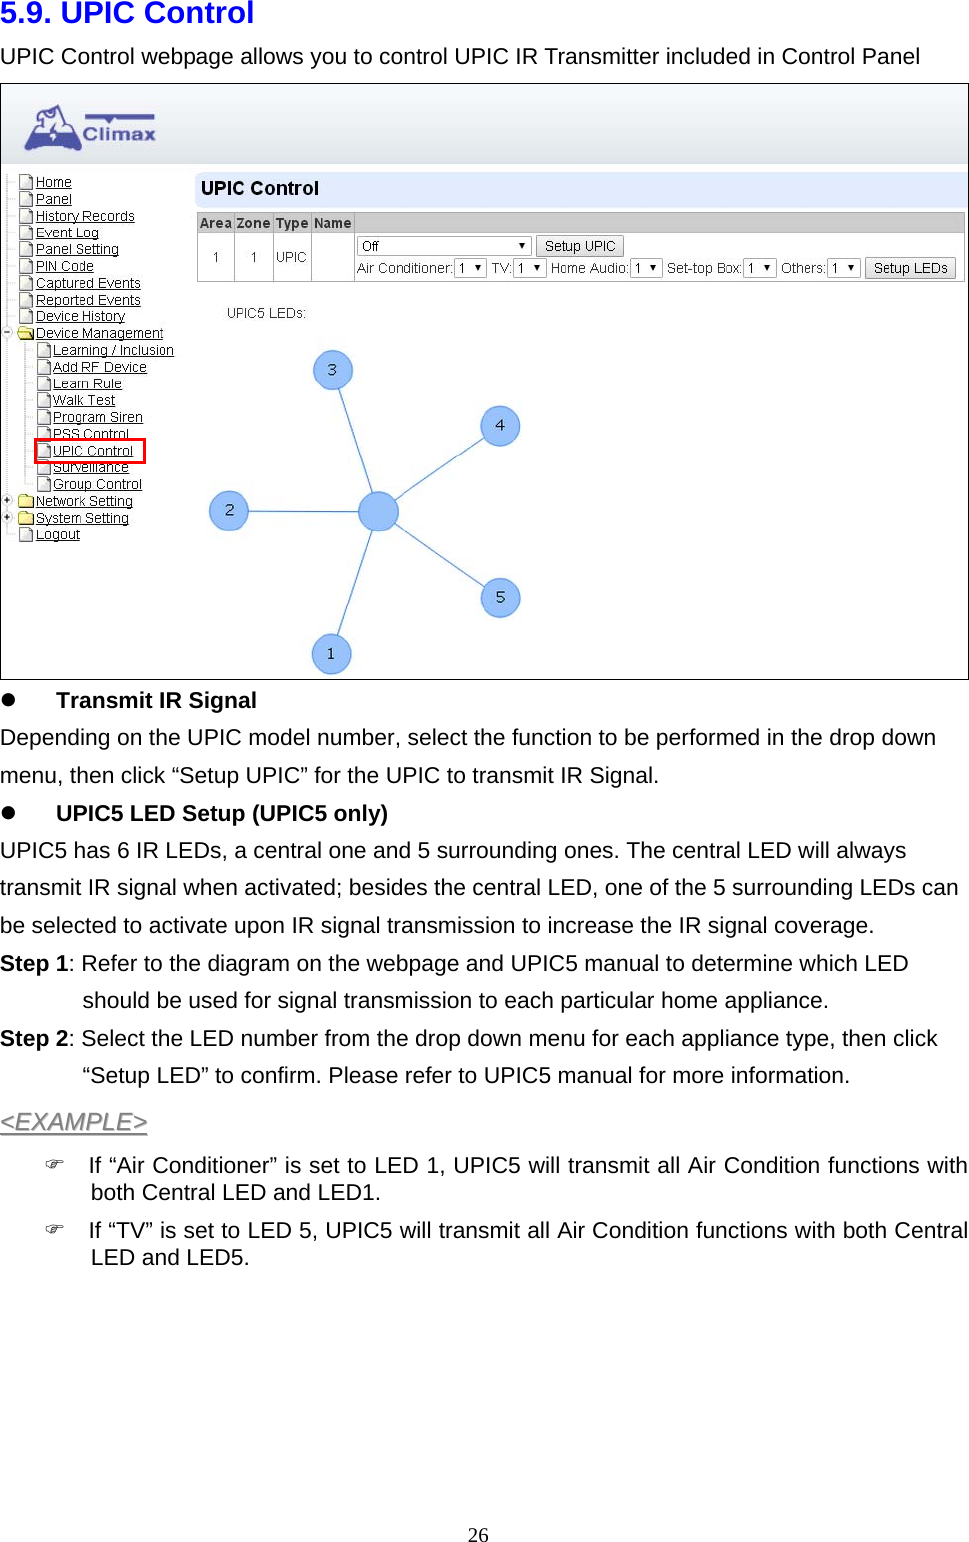  265.9. UPIC Control UPIC Control webpage allows you to control UPIC IR Transmitter included in Control Panel   Transmit IR Signal Depending on the UPIC model number, select the function to be performed in the drop down menu, then click “Setup UPIC” for the UPIC to transmit IR Signal.  UPIC5 LED Setup (UPIC5 only) UPIC5 has 6 IR LEDs, a central one and 5 surrounding ones. The central LED will always transmit IR signal when activated; besides the central LED, one of the 5 surrounding LEDs can be selected to activate upon IR signal transmission to increase the IR signal coverage. Step 1: Refer to the diagram on the webpage and UPIC5 manual to determine which LED should be used for signal transmission to each particular home appliance. Step 2: Select the LED number from the drop down menu for each appliance type, then click “Setup LED” to confirm. Please refer to UPIC5 manual for more information. &lt;&lt;EEXXAAMMPPLLEE&gt;&gt;    If “Air Conditioner” is set to LED 1, UPIC5 will transmit all Air Condition functions with both Central LED and LED1.   If “TV” is set to LED 5, UPIC5 will transmit all Air Condition functions with both Central LED and LED5.       